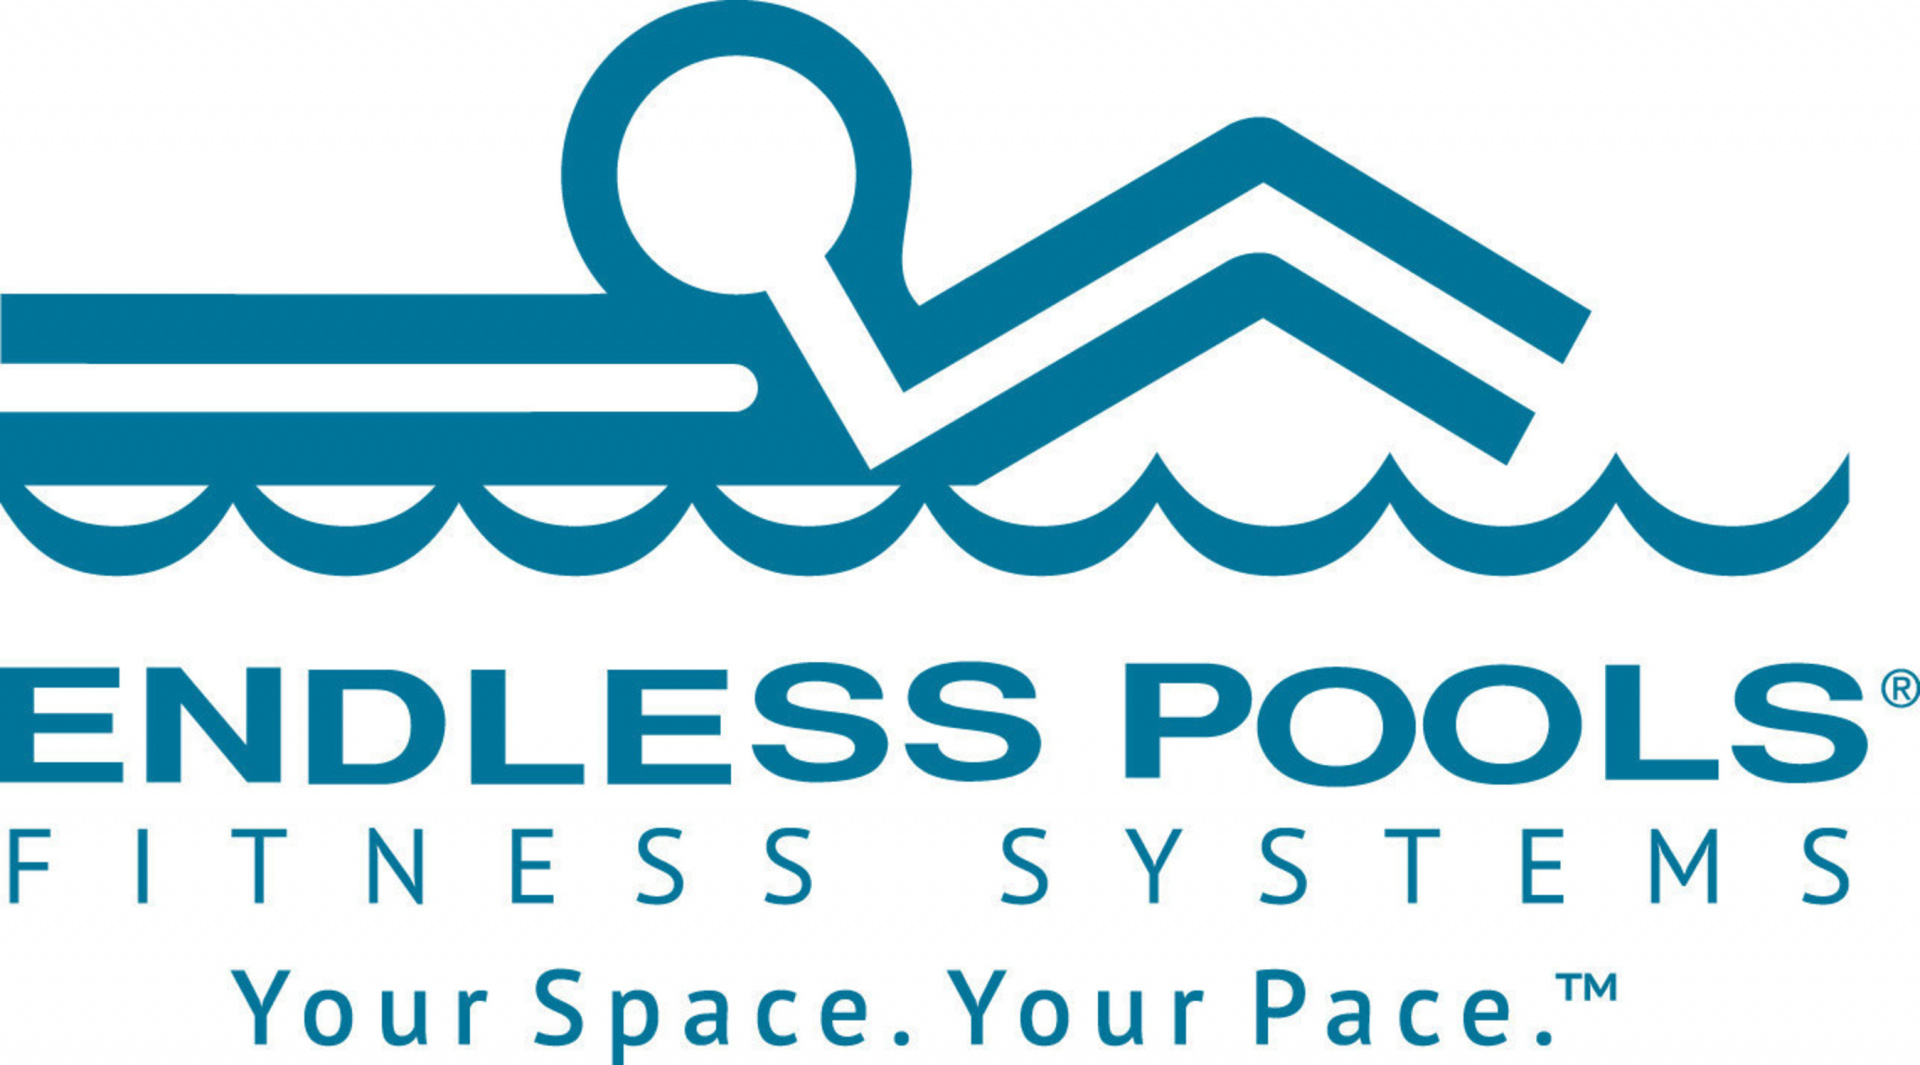 Endless Pools Fitness Systems India logo.jpg - 